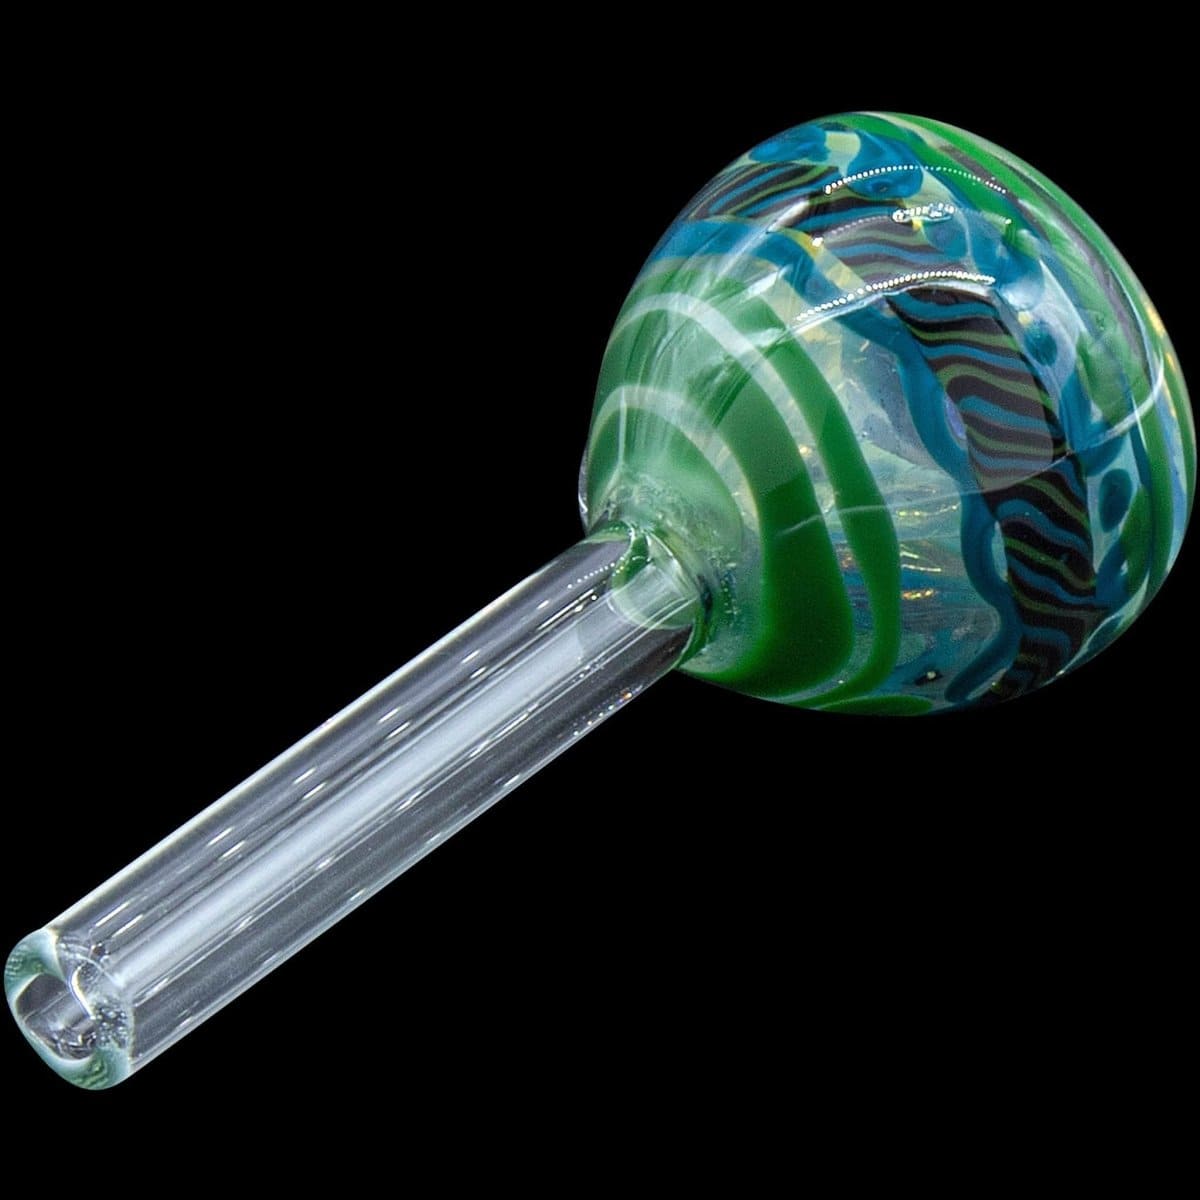 LA Pipes Smoking Accessory Painted Warrior Pull-Stem Slide Bowl